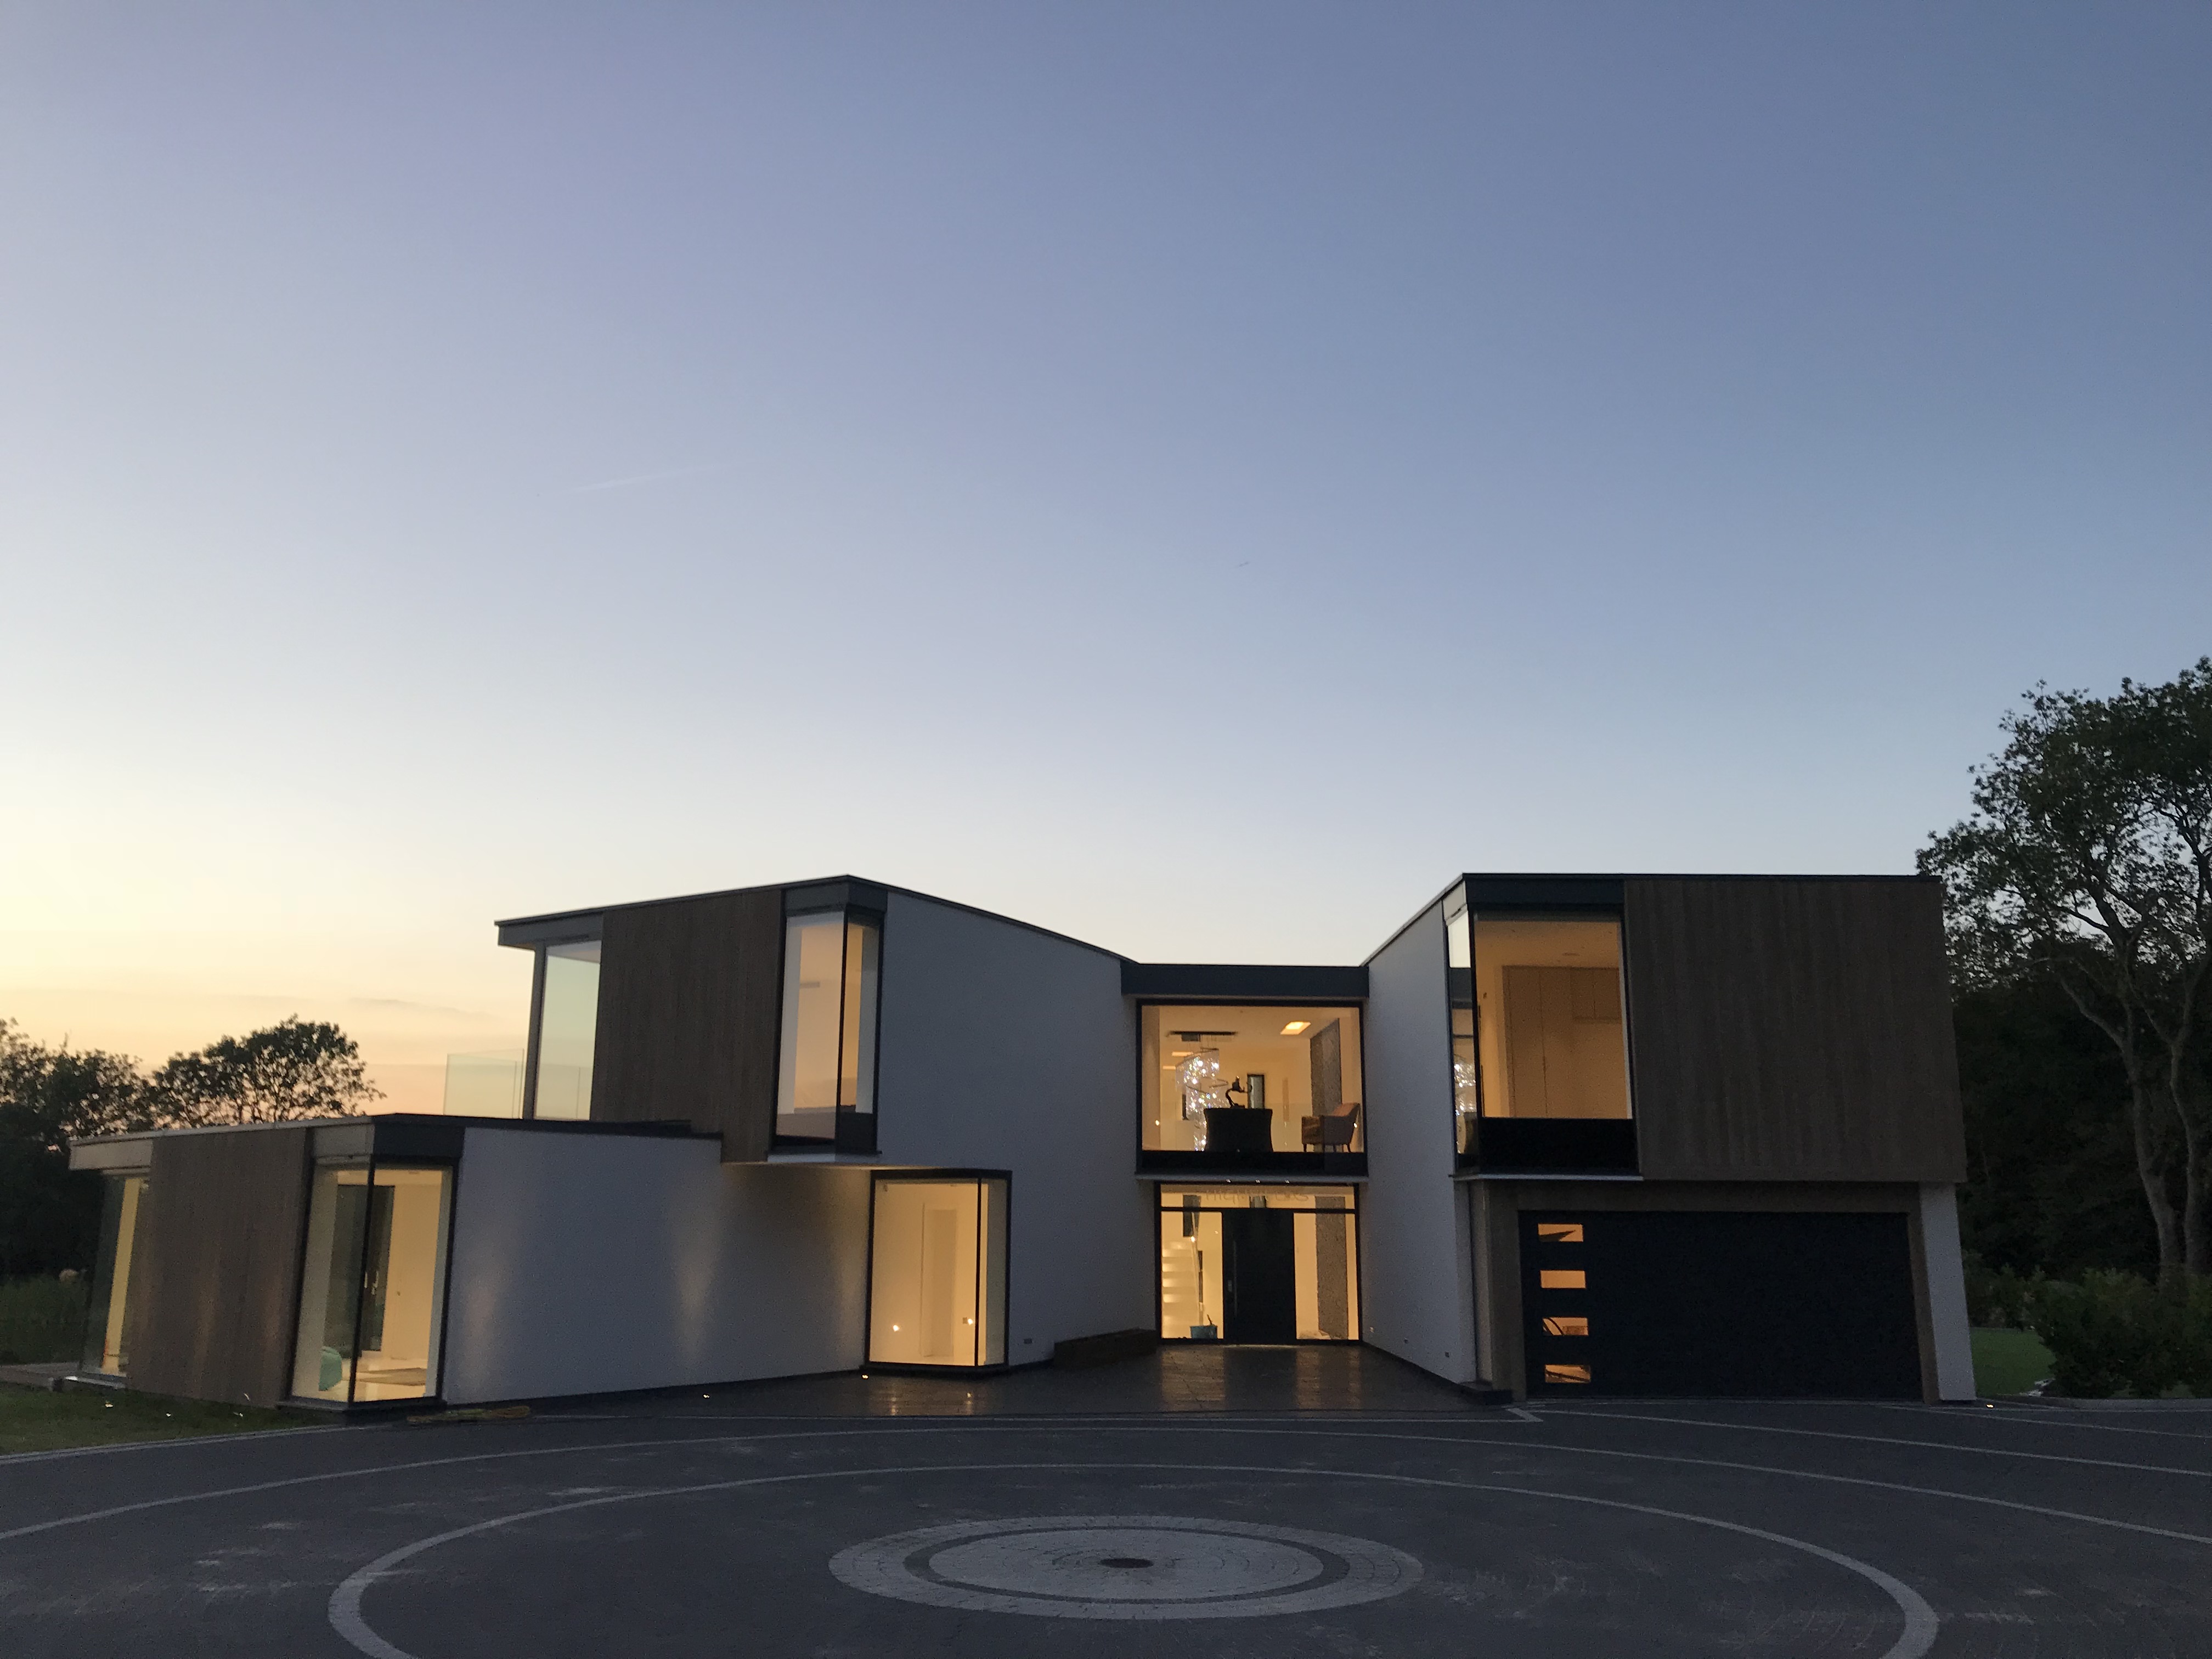 Shows home at dusk, with Lutron lighting.